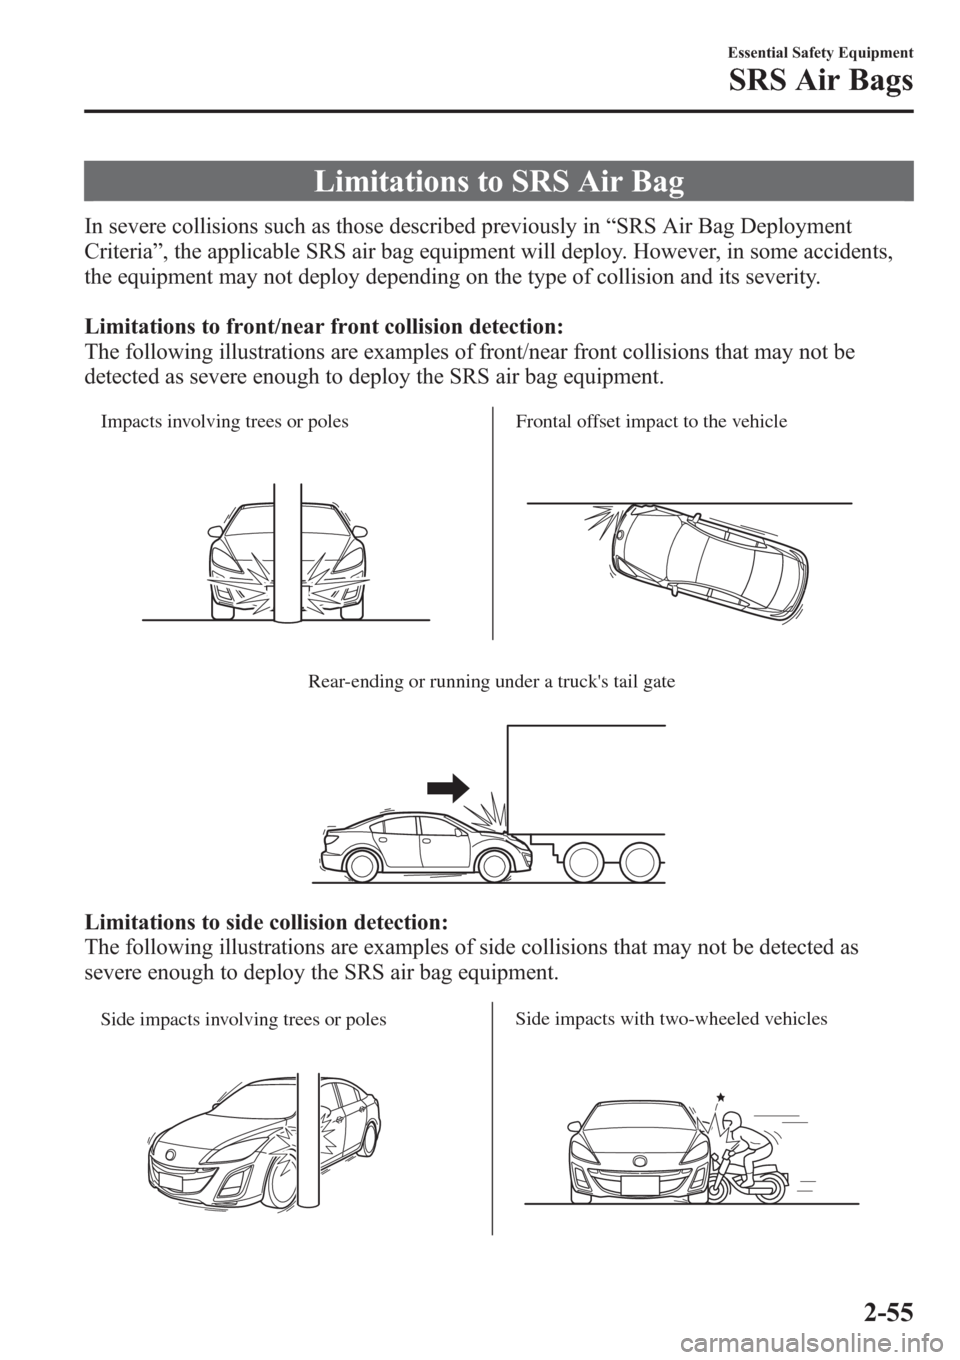 MAZDA MODEL 3 HATCHBACK 2013  Owners Manual (in English) Limitations to SRS Air Bag
In severe collisions such as those described previously in“SRS Air Bag Deployment
Criteria”, the applicable SRS air bag equipment will deploy. However, in some accidents